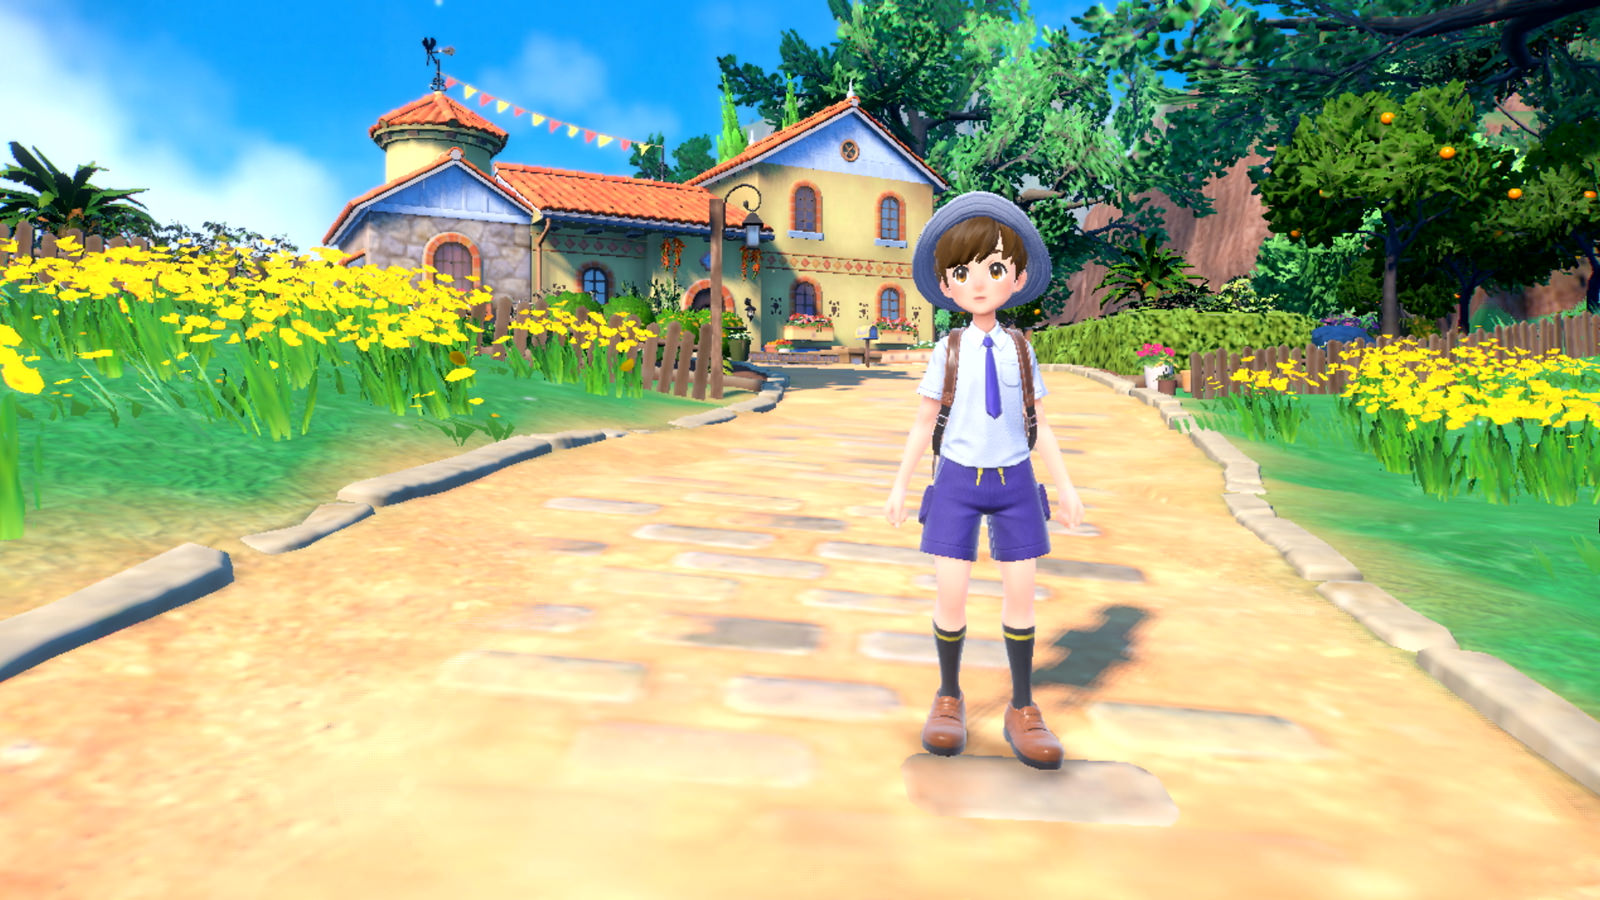 A young trainer stands on a path surrounded by flowers.